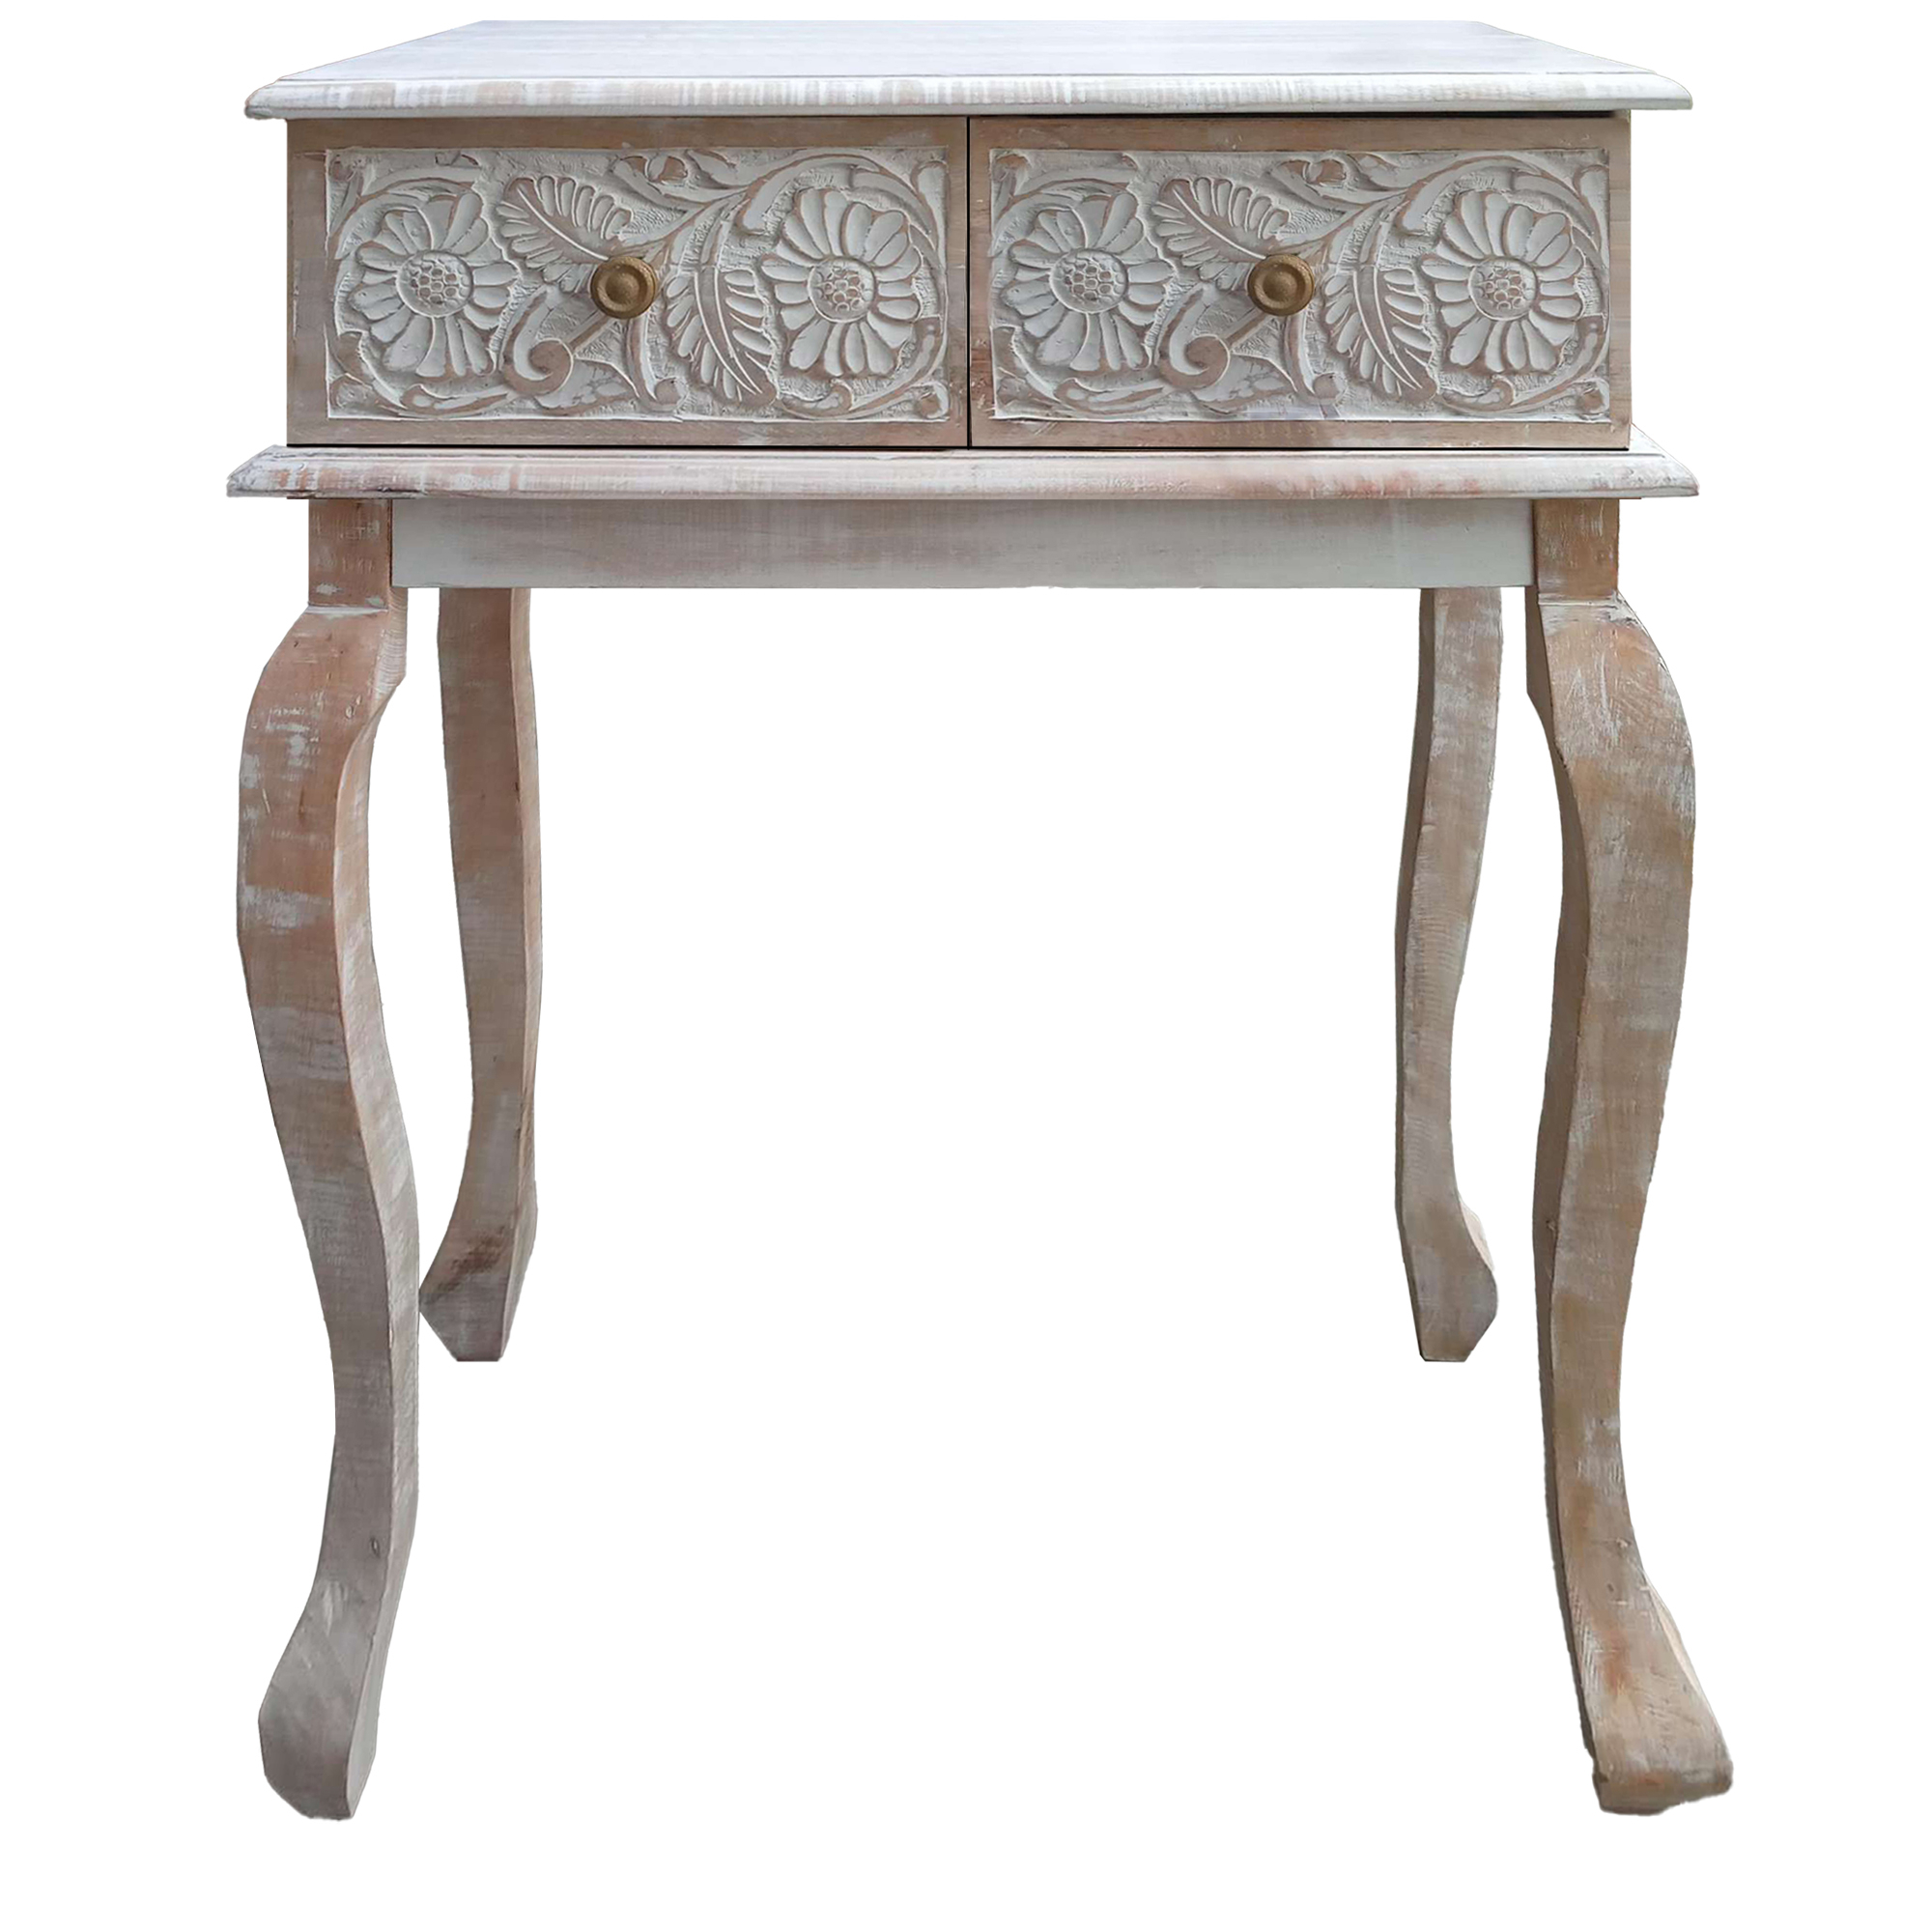 2 Drawer Mango Wood Console Table With Floral Carved Front, Brown And White- Saltoro Sherpi